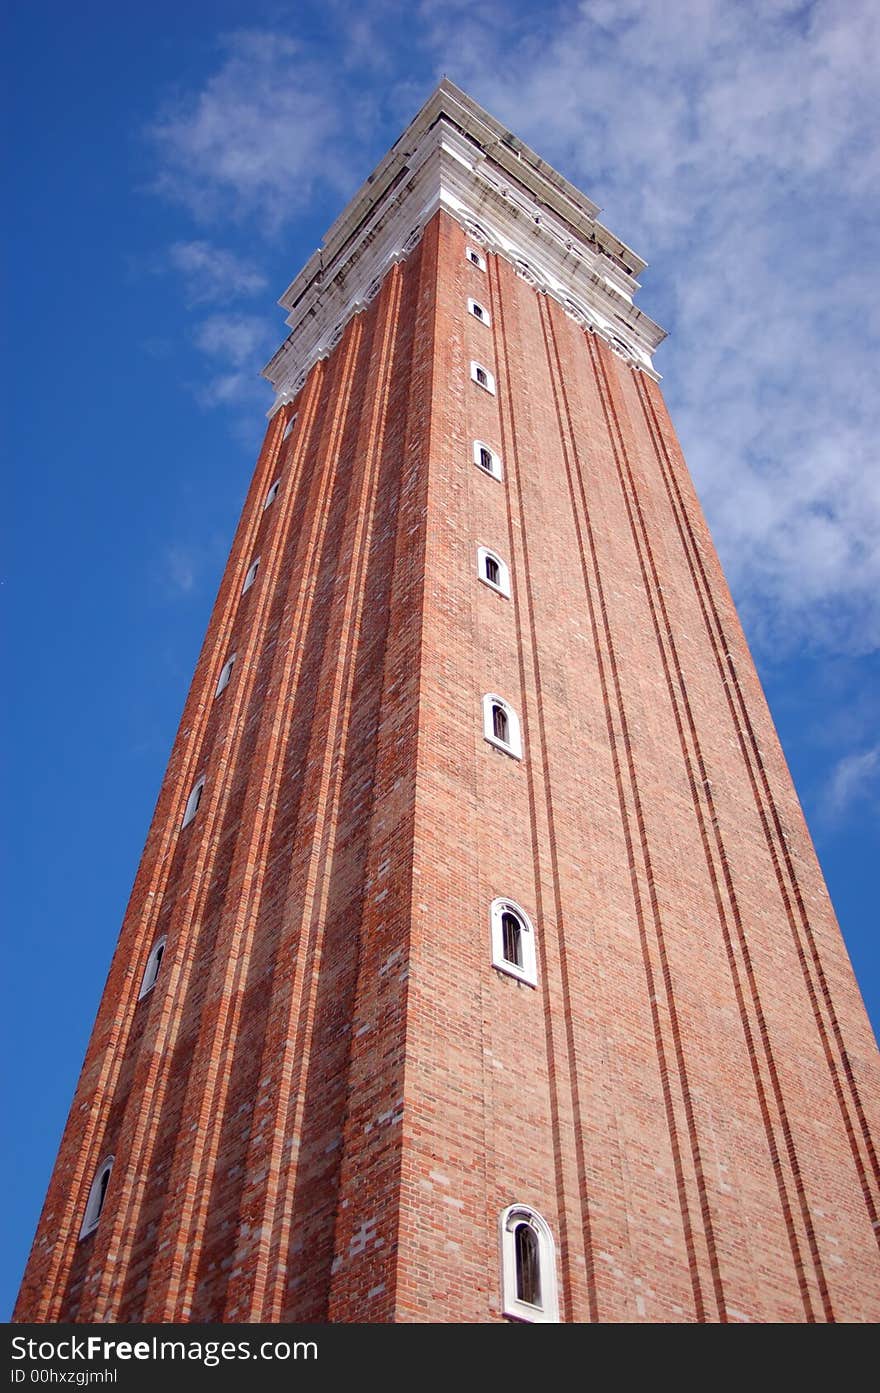 Tower on Piazza San Marco